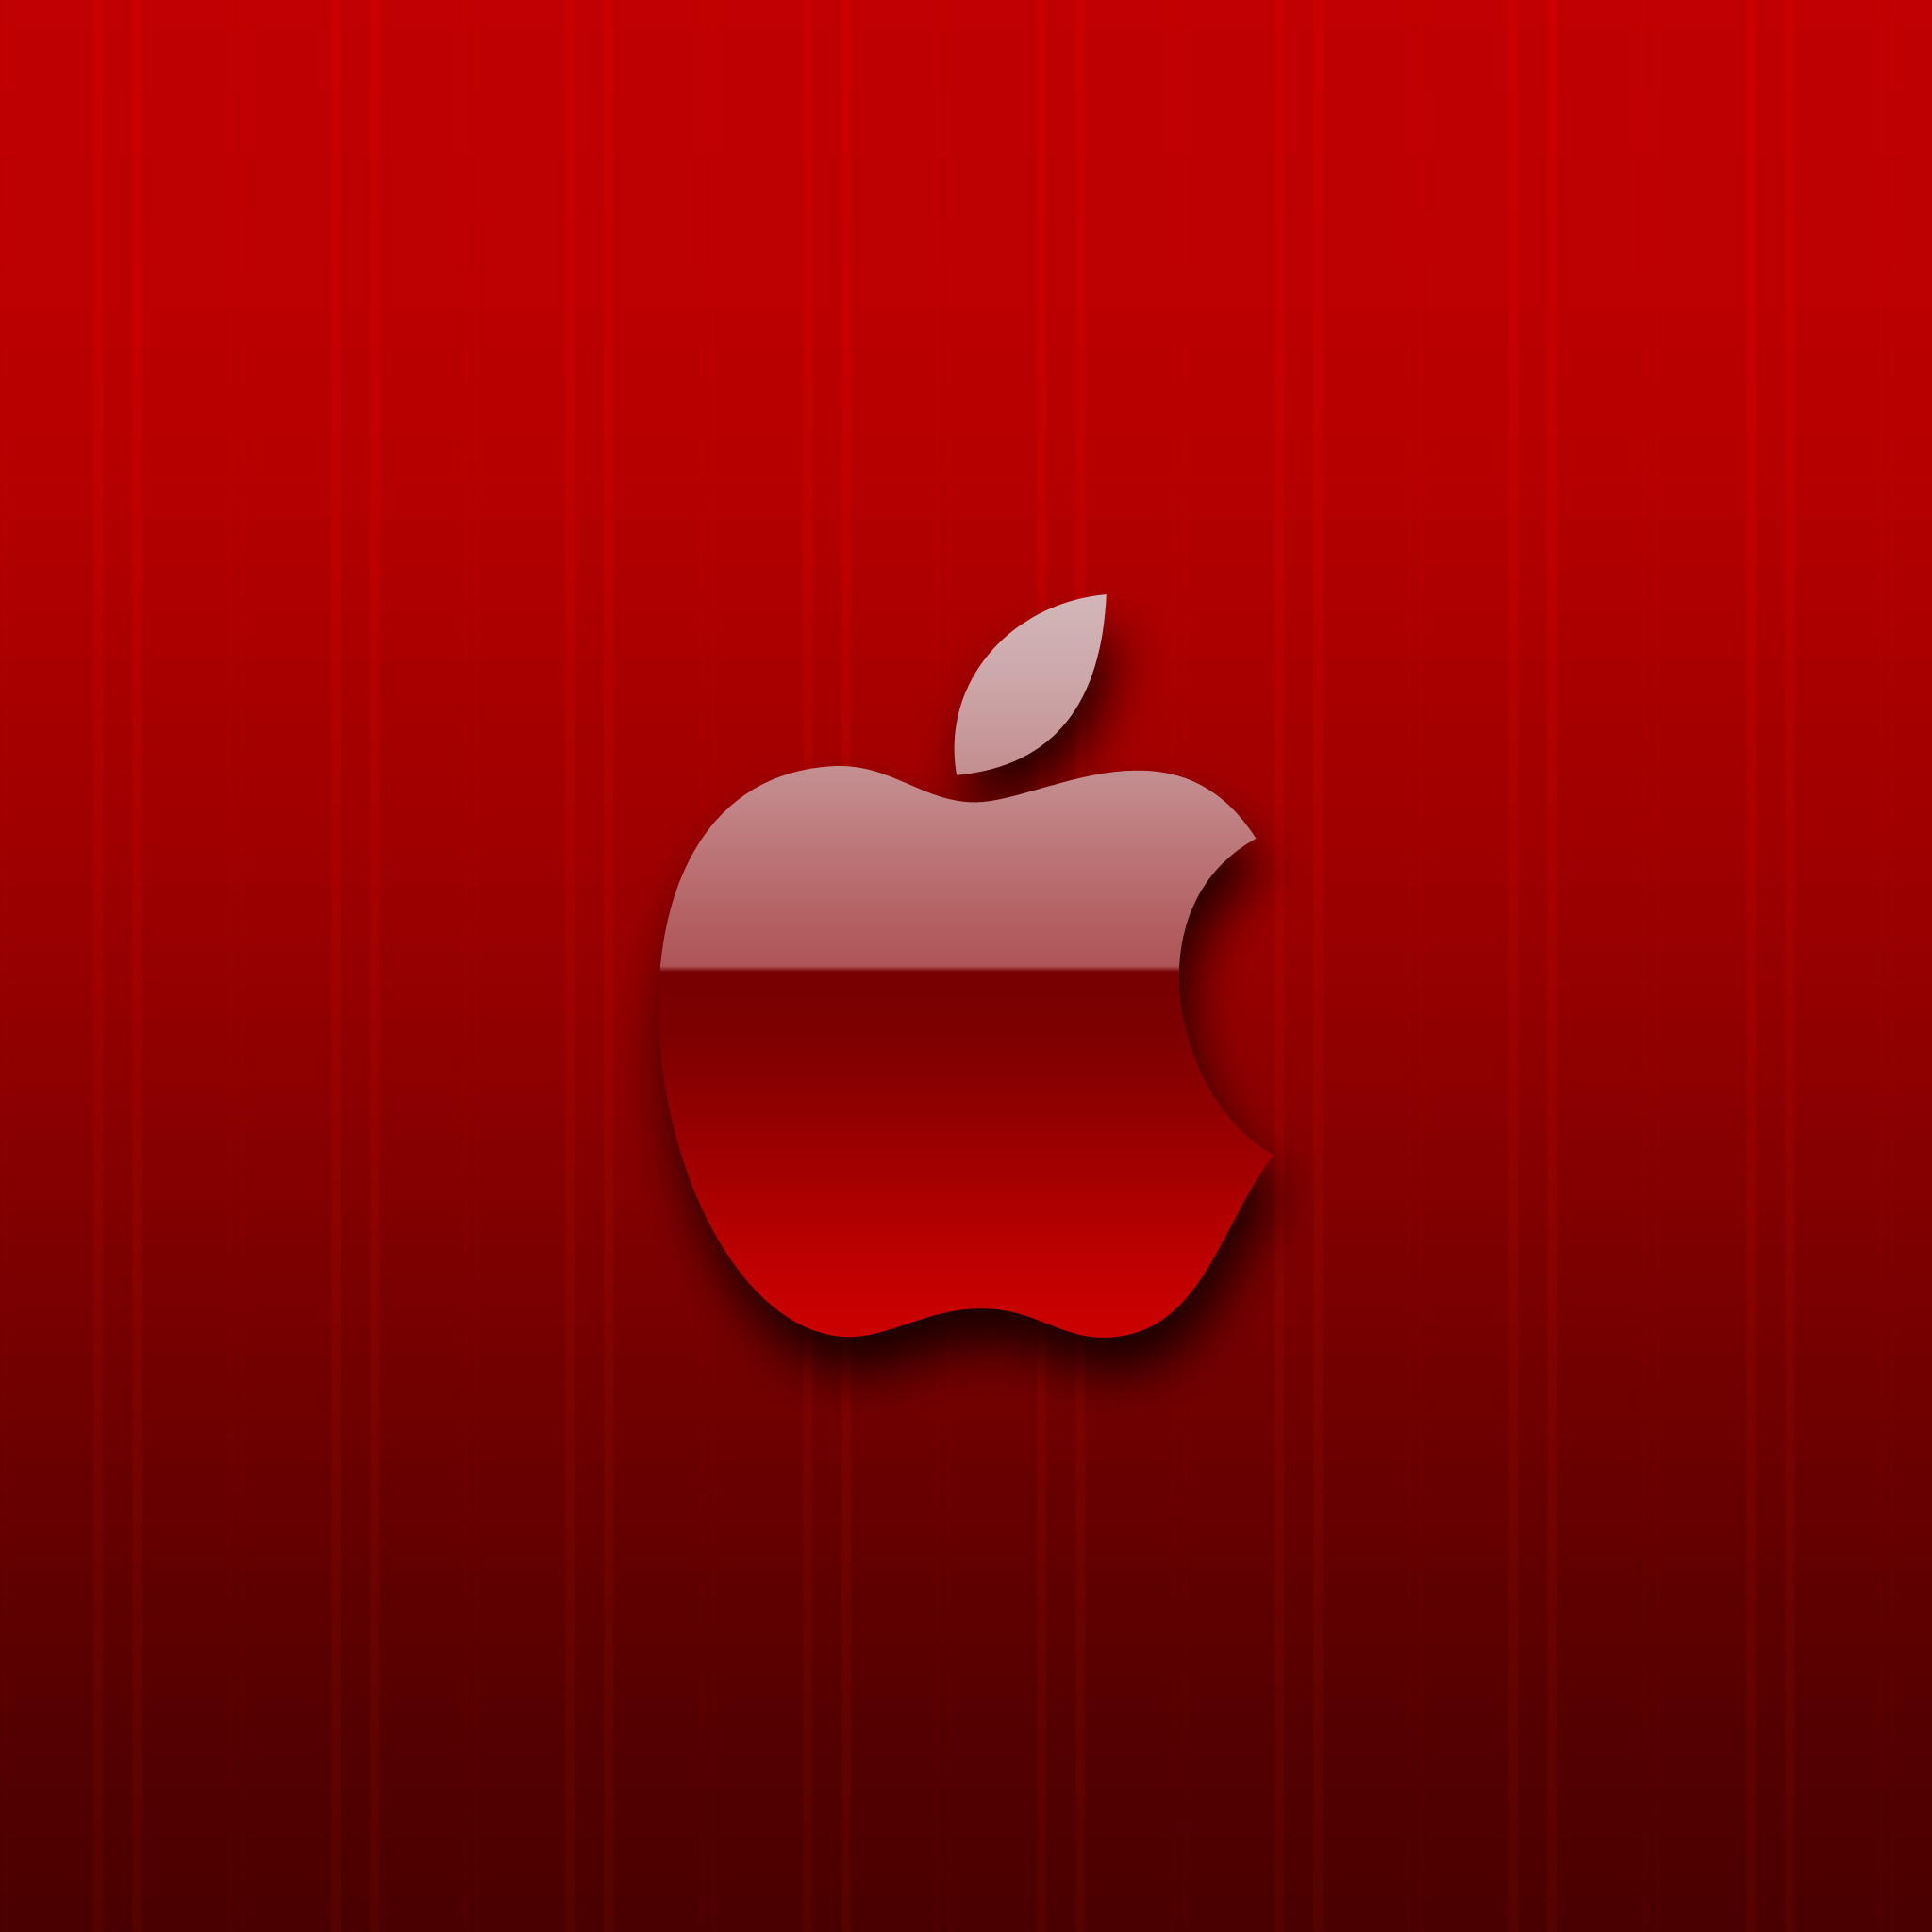 Best Wallpaper For All iPhone Retina Red Apple iPad